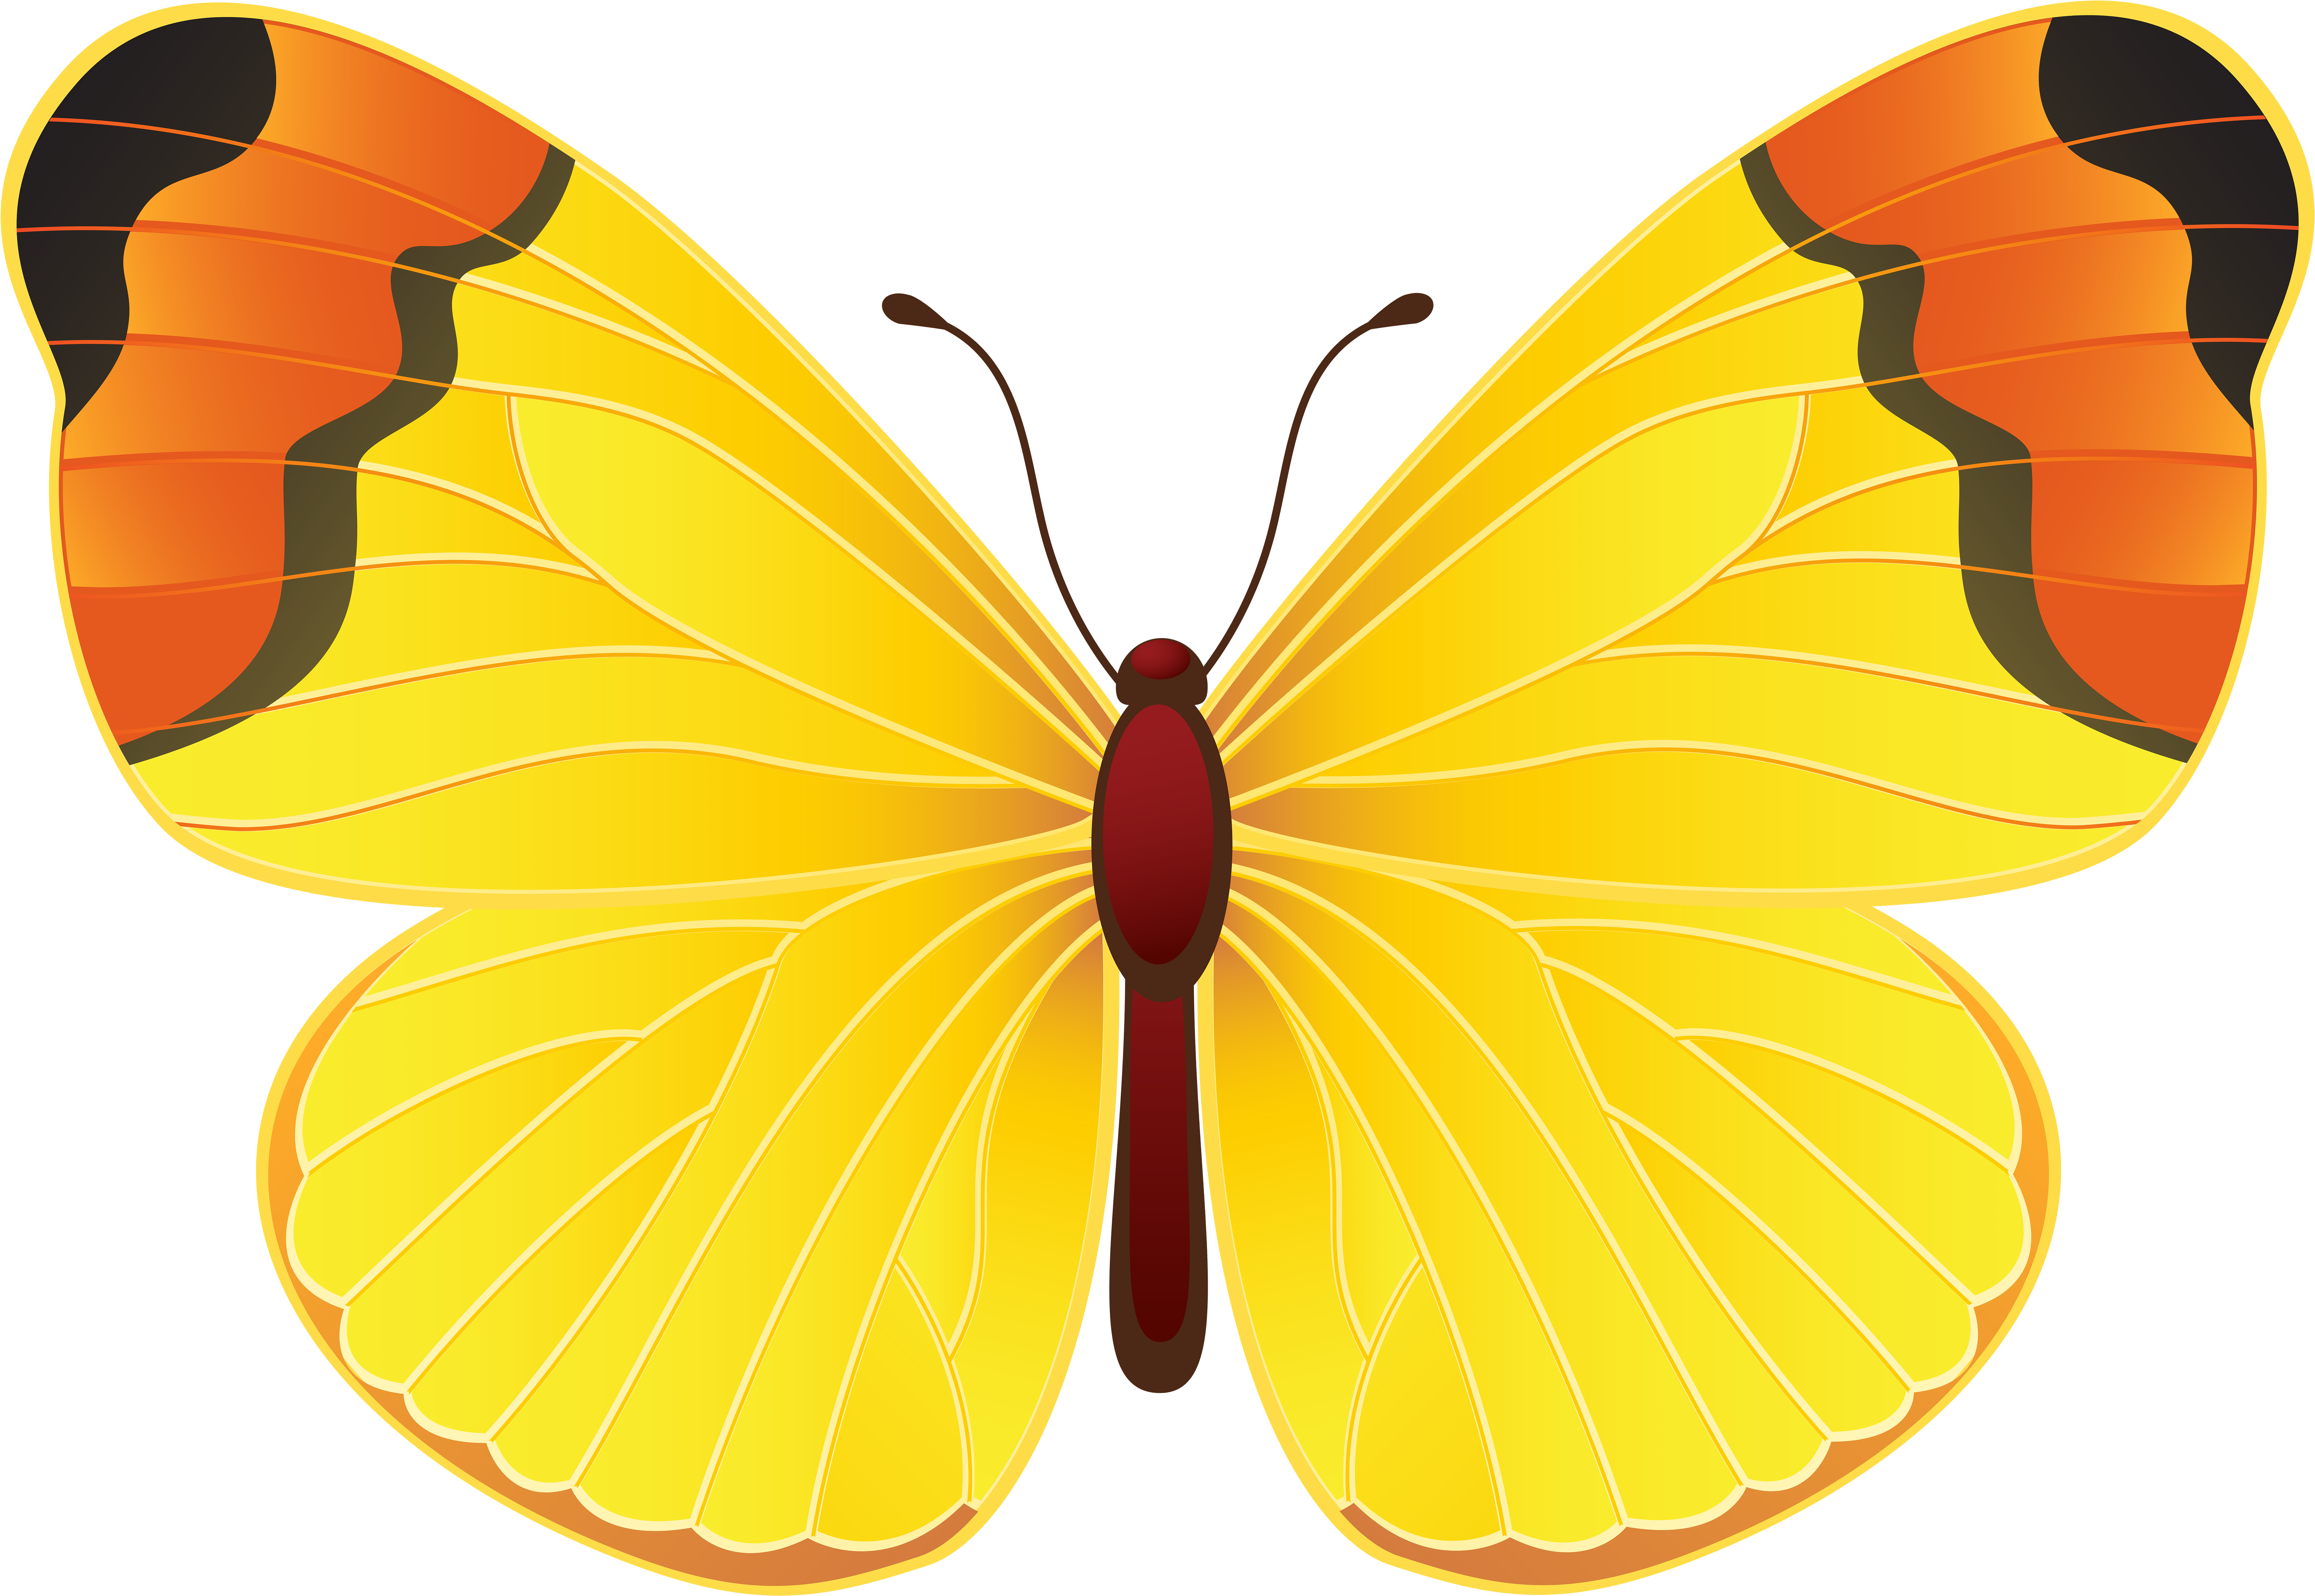 Yellow Butterfly - Large Copper (8000x5551)